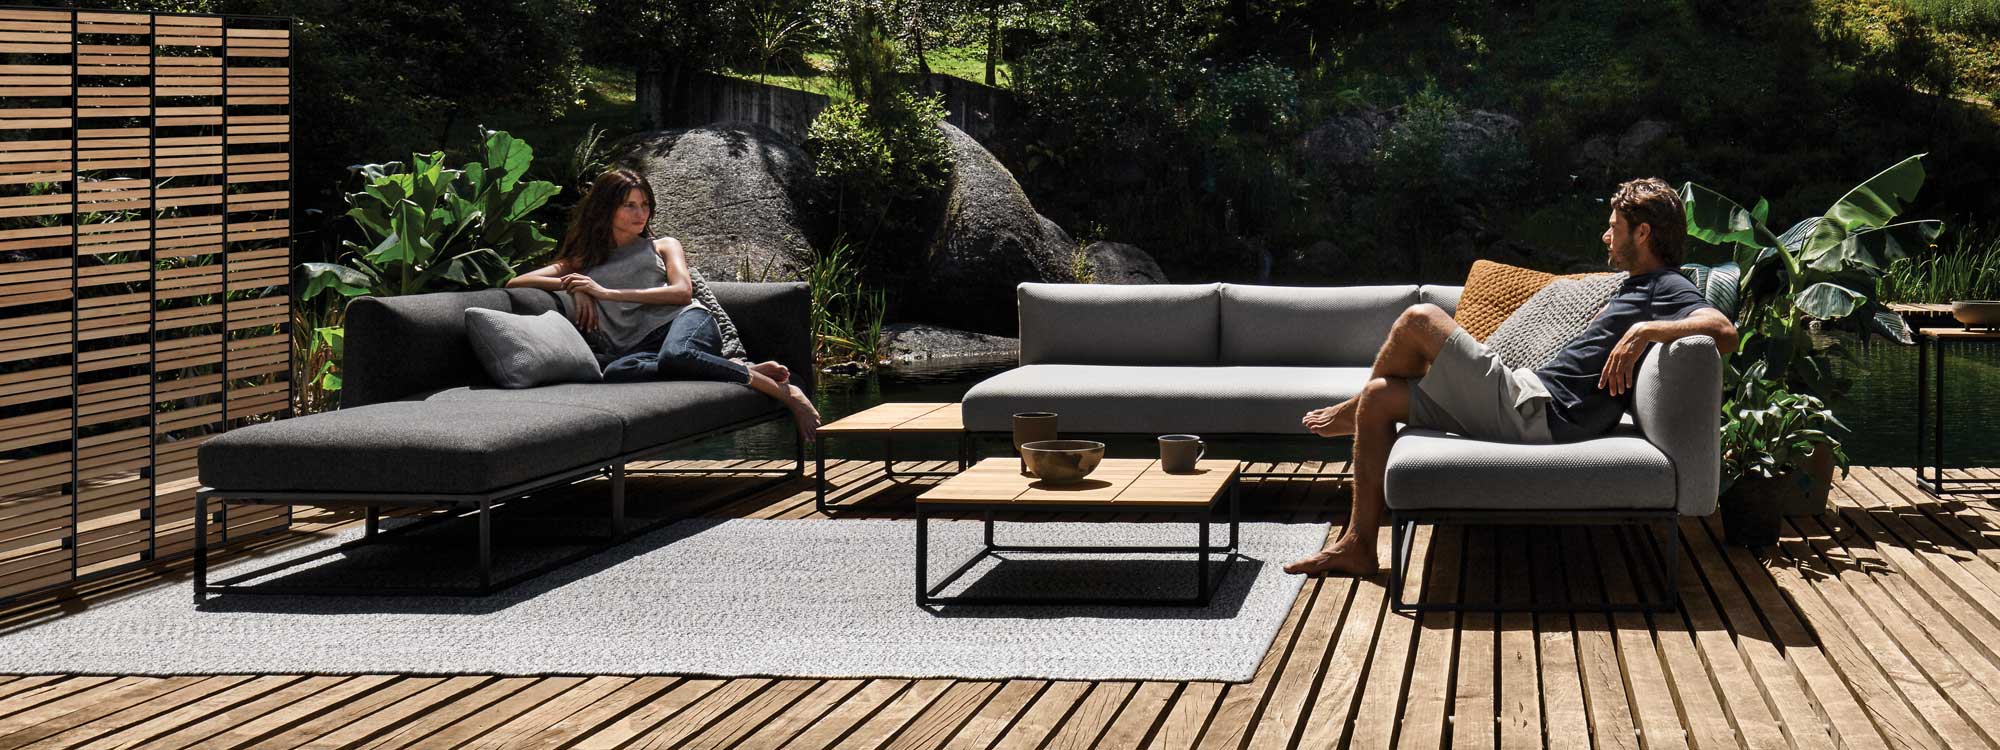 Image of couple relaxing on Gloster Maya luxury garden corner sofa and daybed, with teak and meteor-coloured Screen in the background